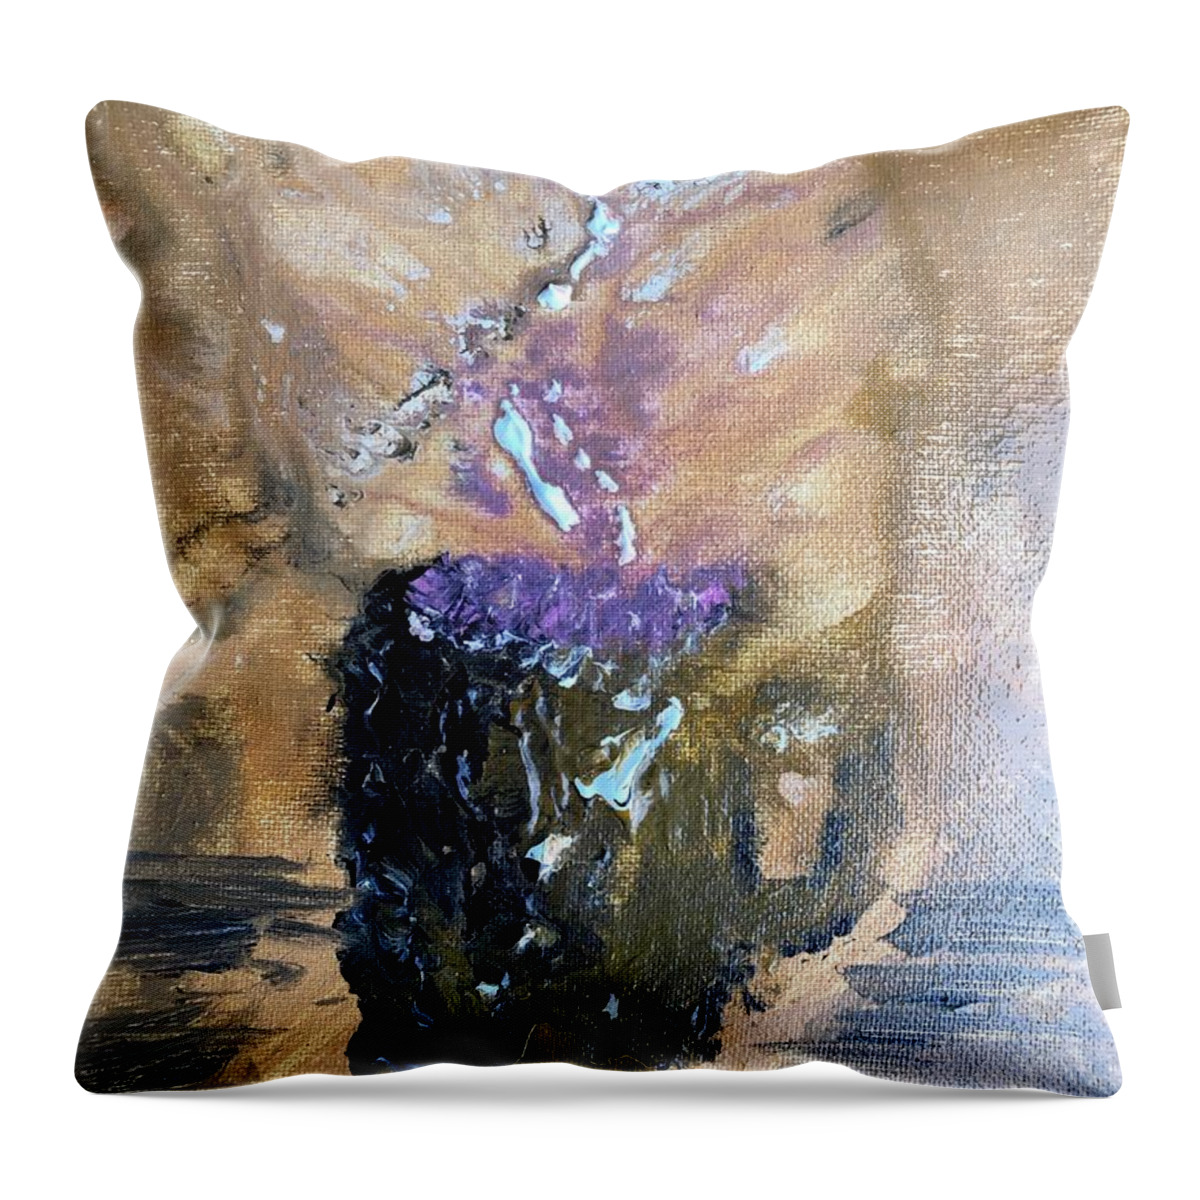 Still Life Throw Pillow featuring the painting Ifonly by Bethany Beeler